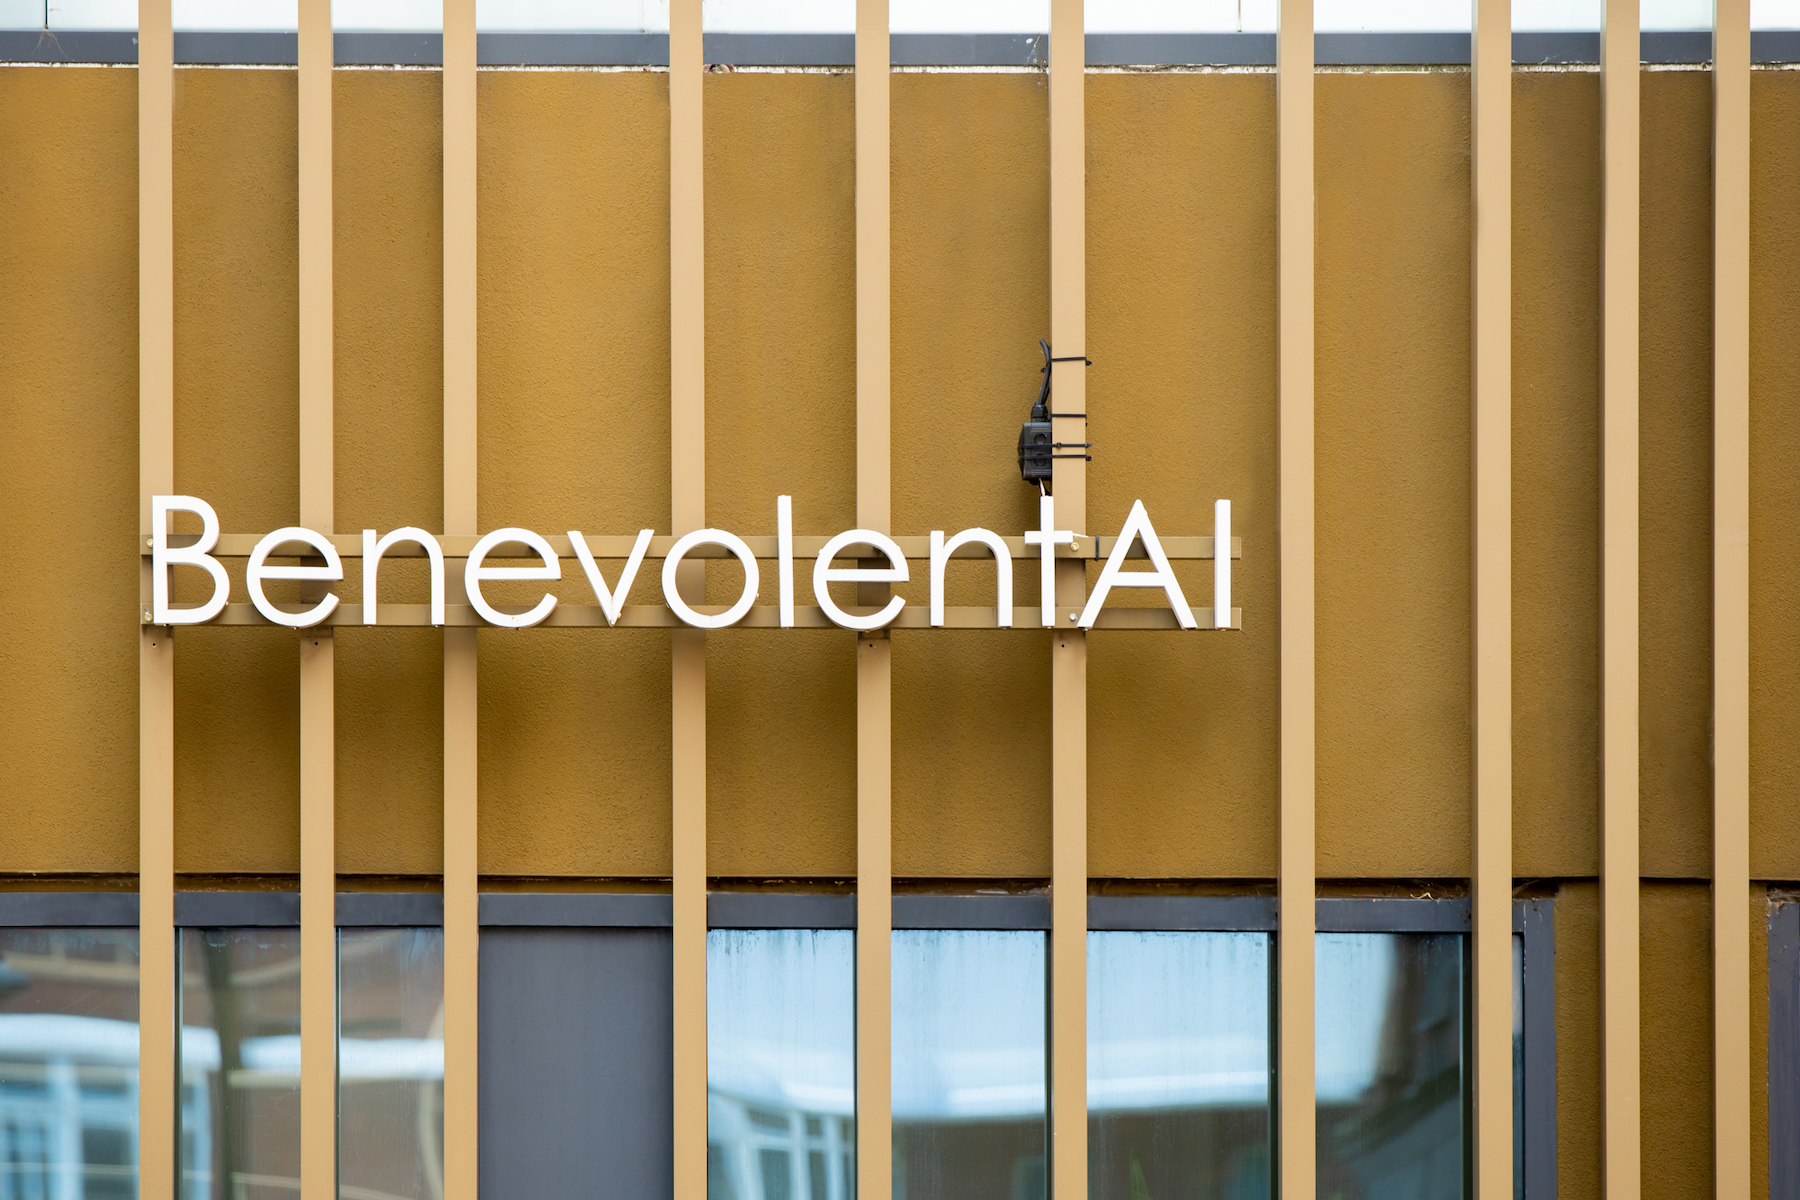 Drug discovery firm Benevolent AI to cut half its workforce